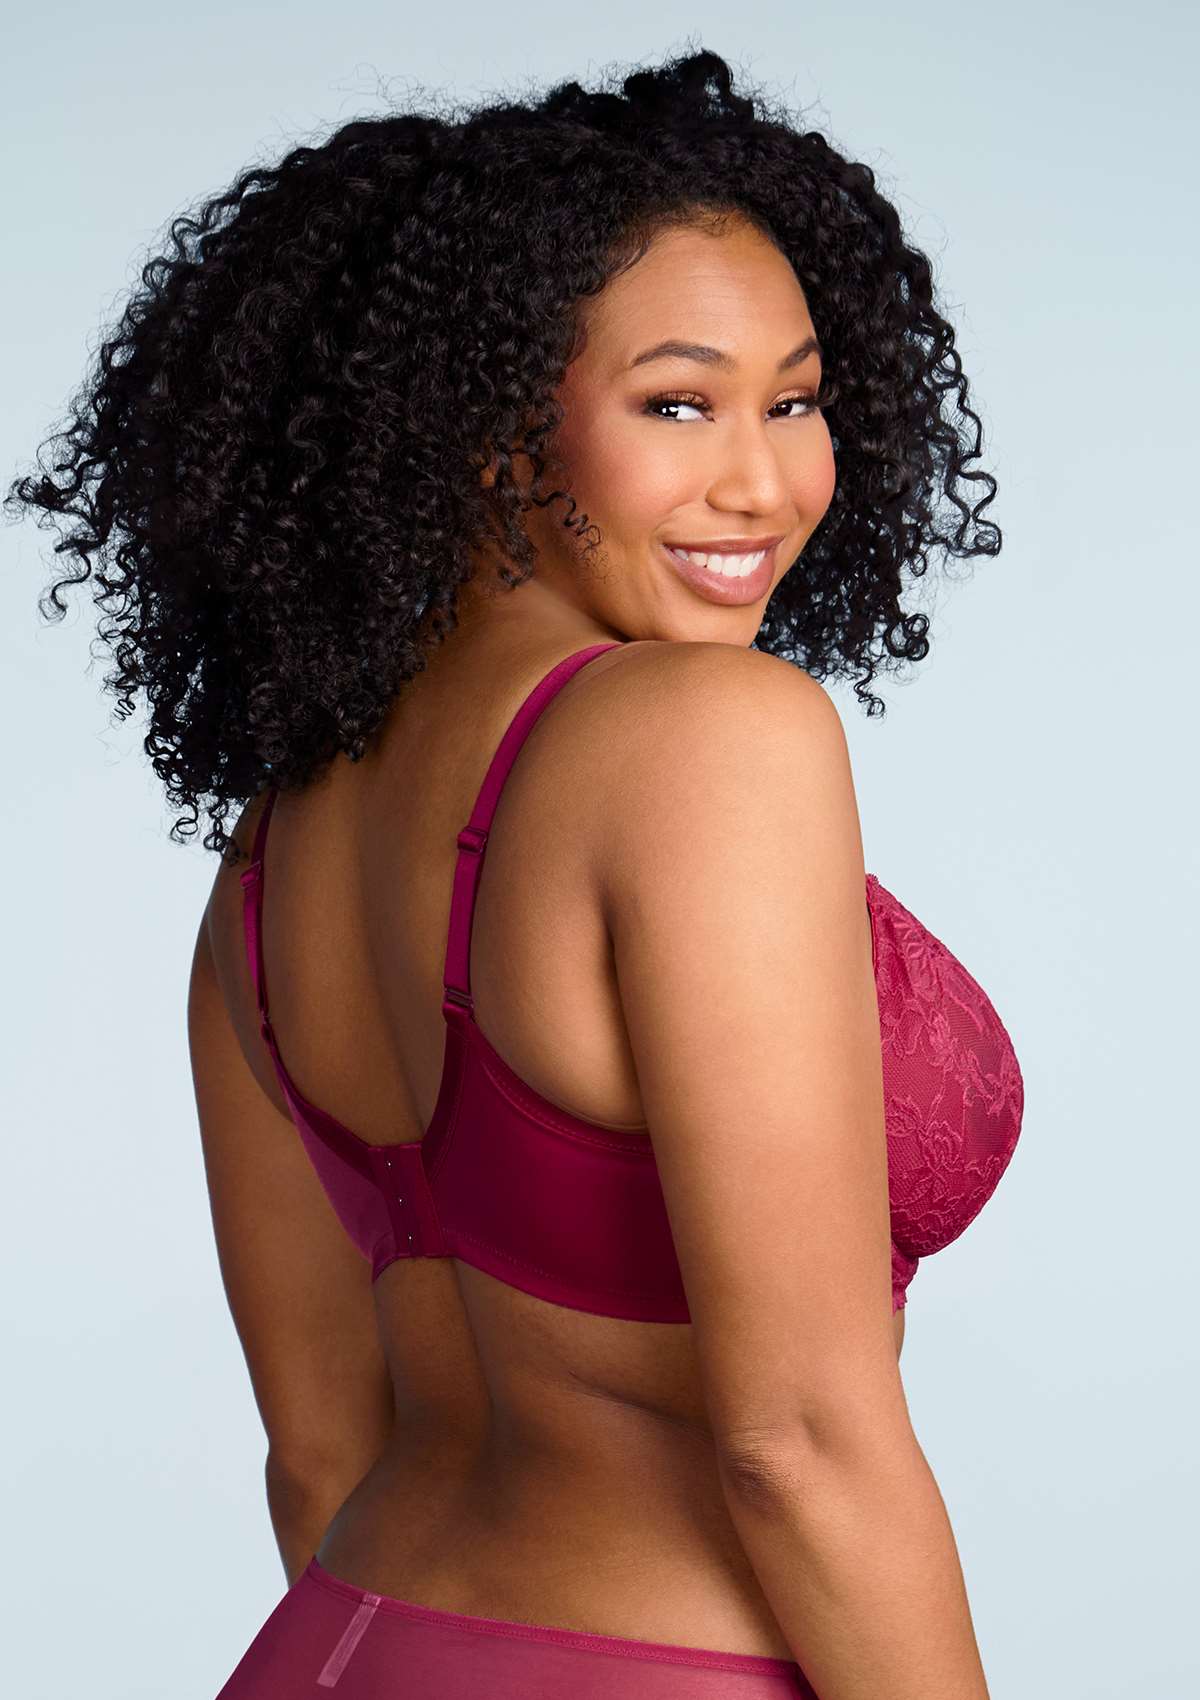 HSIA Pretty In Petals Sexy Lace Bra: Full Coverage Back Smoothing Bra - Red / 42 / G